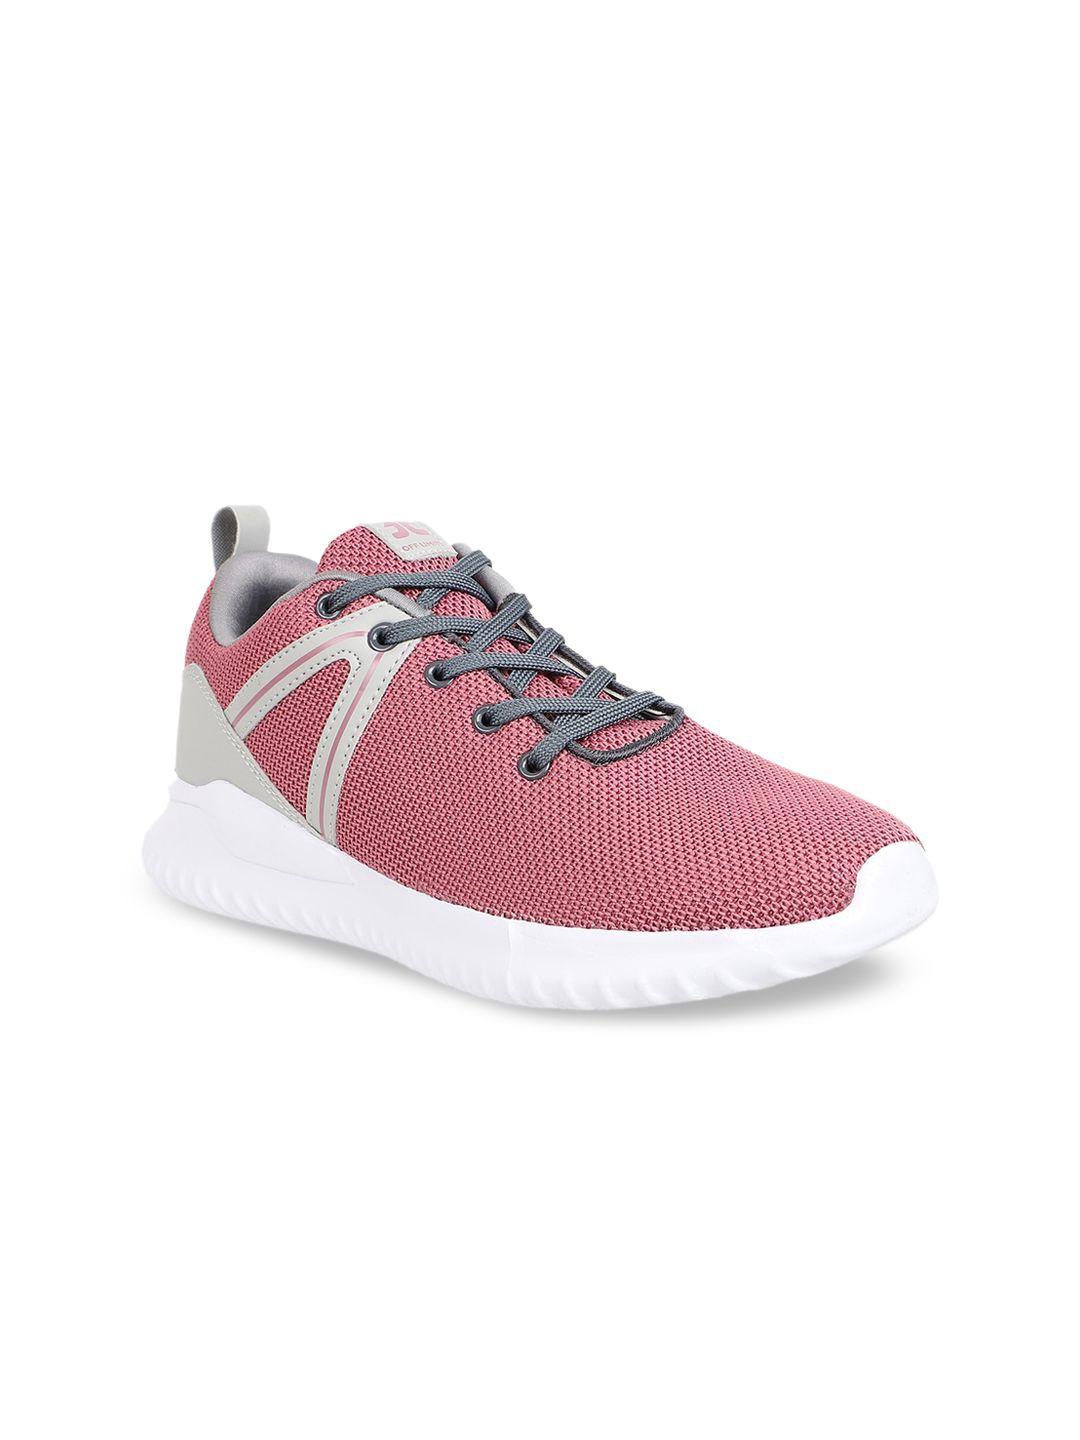 off limits women pink mesh mid-top running shoes